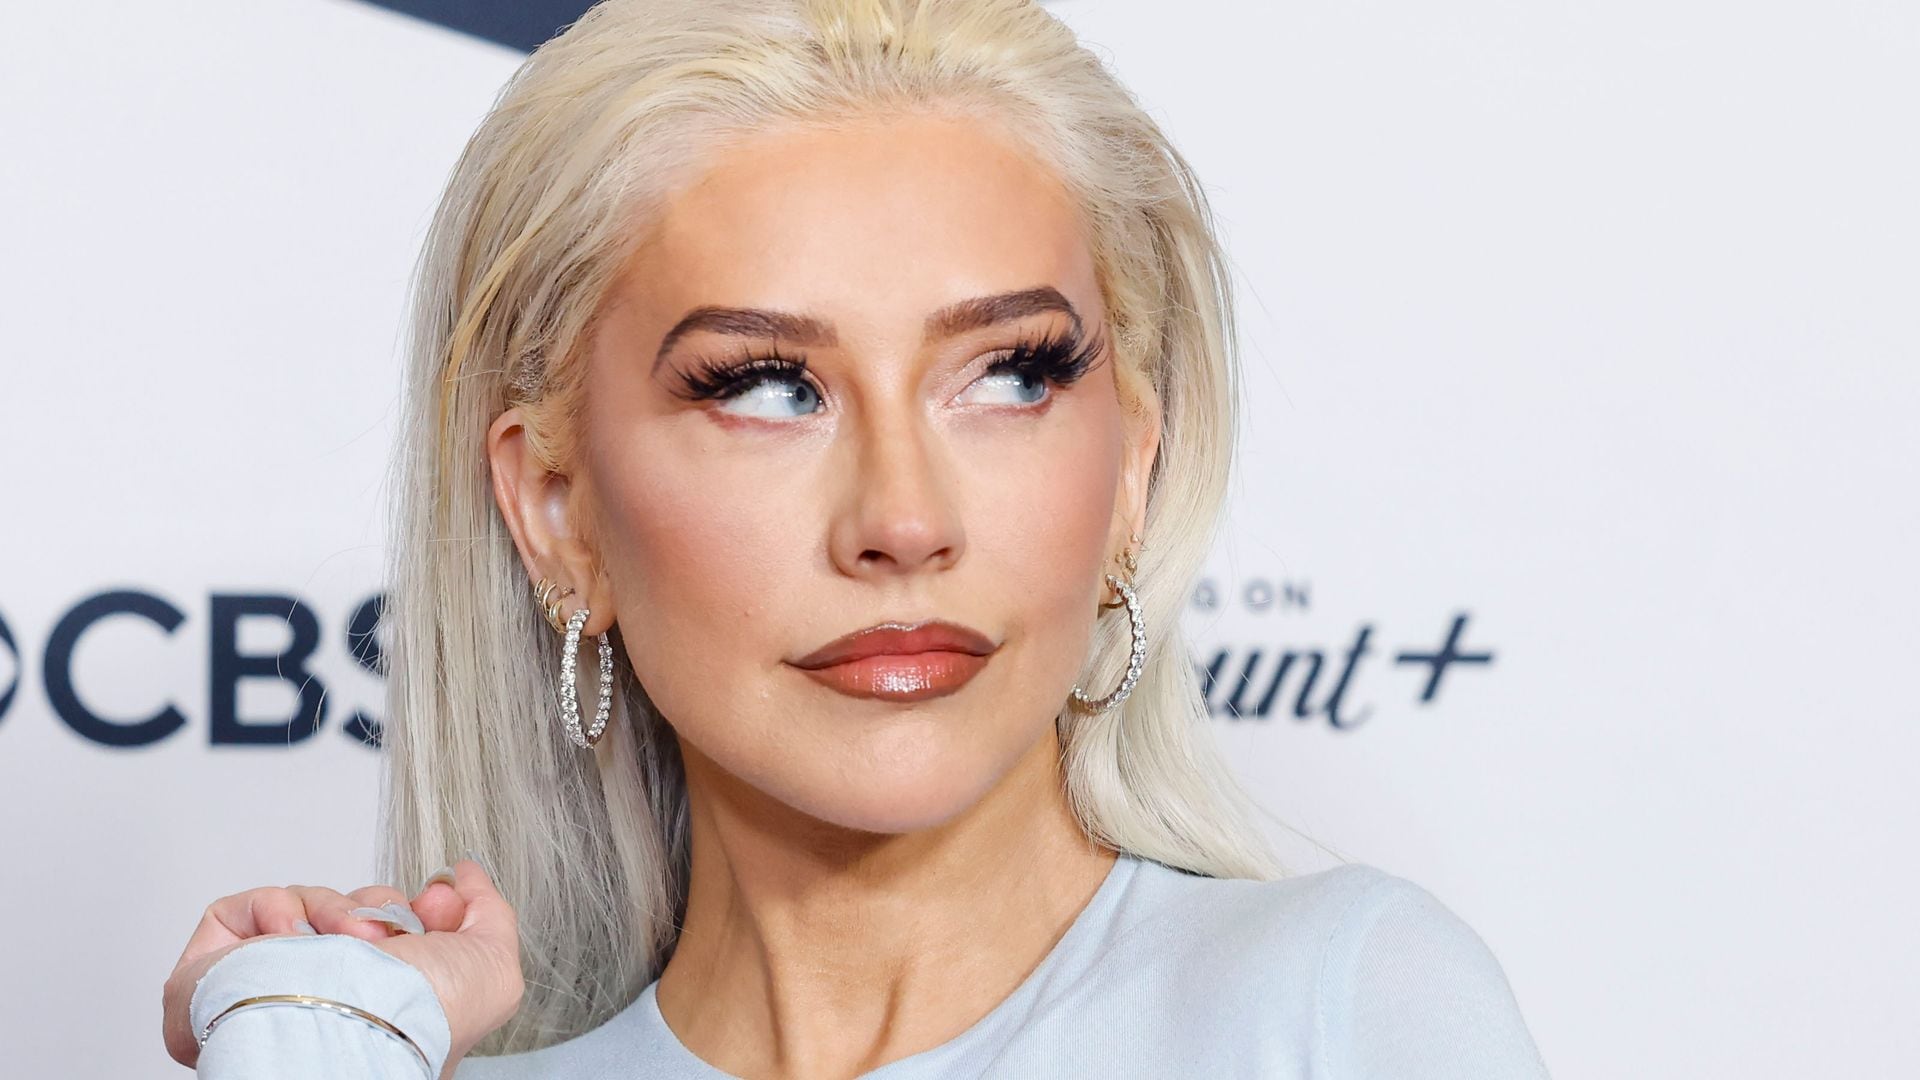 Christina Aguilera is a proud mom celebrating in rare video with 9-year-old daughter Summer